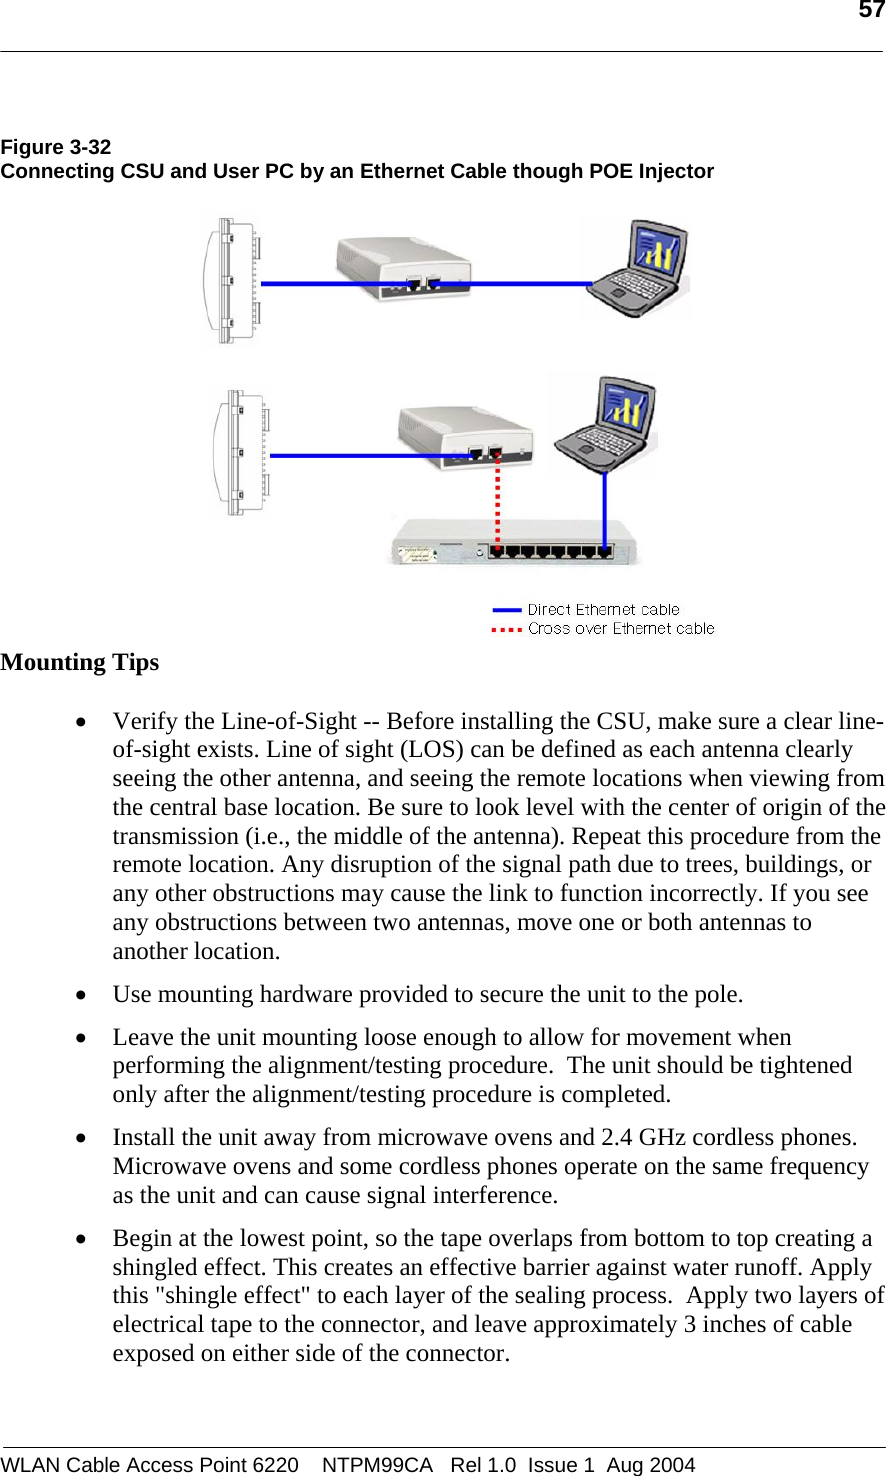   57   Figure 3-32 Connecting CSU and User PC by an Ethernet Cable though POE Injector  Mounting Tips  • Verify the Line-of-Sight -- Before installing the CSU, make sure a clear line-of-sight exists. Line of sight (LOS) can be defined as each antenna clearly seeing the other antenna, and seeing the remote locations when viewing from the central base location. Be sure to look level with the center of origin of the transmission (i.e., the middle of the antenna). Repeat this procedure from the remote location. Any disruption of the signal path due to trees, buildings, or any other obstructions may cause the link to function incorrectly. If you see any obstructions between two antennas, move one or both antennas to another location. • Use mounting hardware provided to secure the unit to the pole.     • Leave the unit mounting loose enough to allow for movement when performing the alignment/testing procedure.  The unit should be tightened only after the alignment/testing procedure is completed.   • Install the unit away from microwave ovens and 2.4 GHz cordless phones. Microwave ovens and some cordless phones operate on the same frequency as the unit and can cause signal interference. • Begin at the lowest point, so the tape overlaps from bottom to top creating a shingled effect. This creates an effective barrier against water runoff. Apply this &quot;shingle effect&quot; to each layer of the sealing process.  Apply two layers of electrical tape to the connector, and leave approximately 3 inches of cable exposed on either side of the connector.  WLAN Cable Access Point 6220    NTPM99CA   Rel 1.0  Issue 1  Aug 2004 